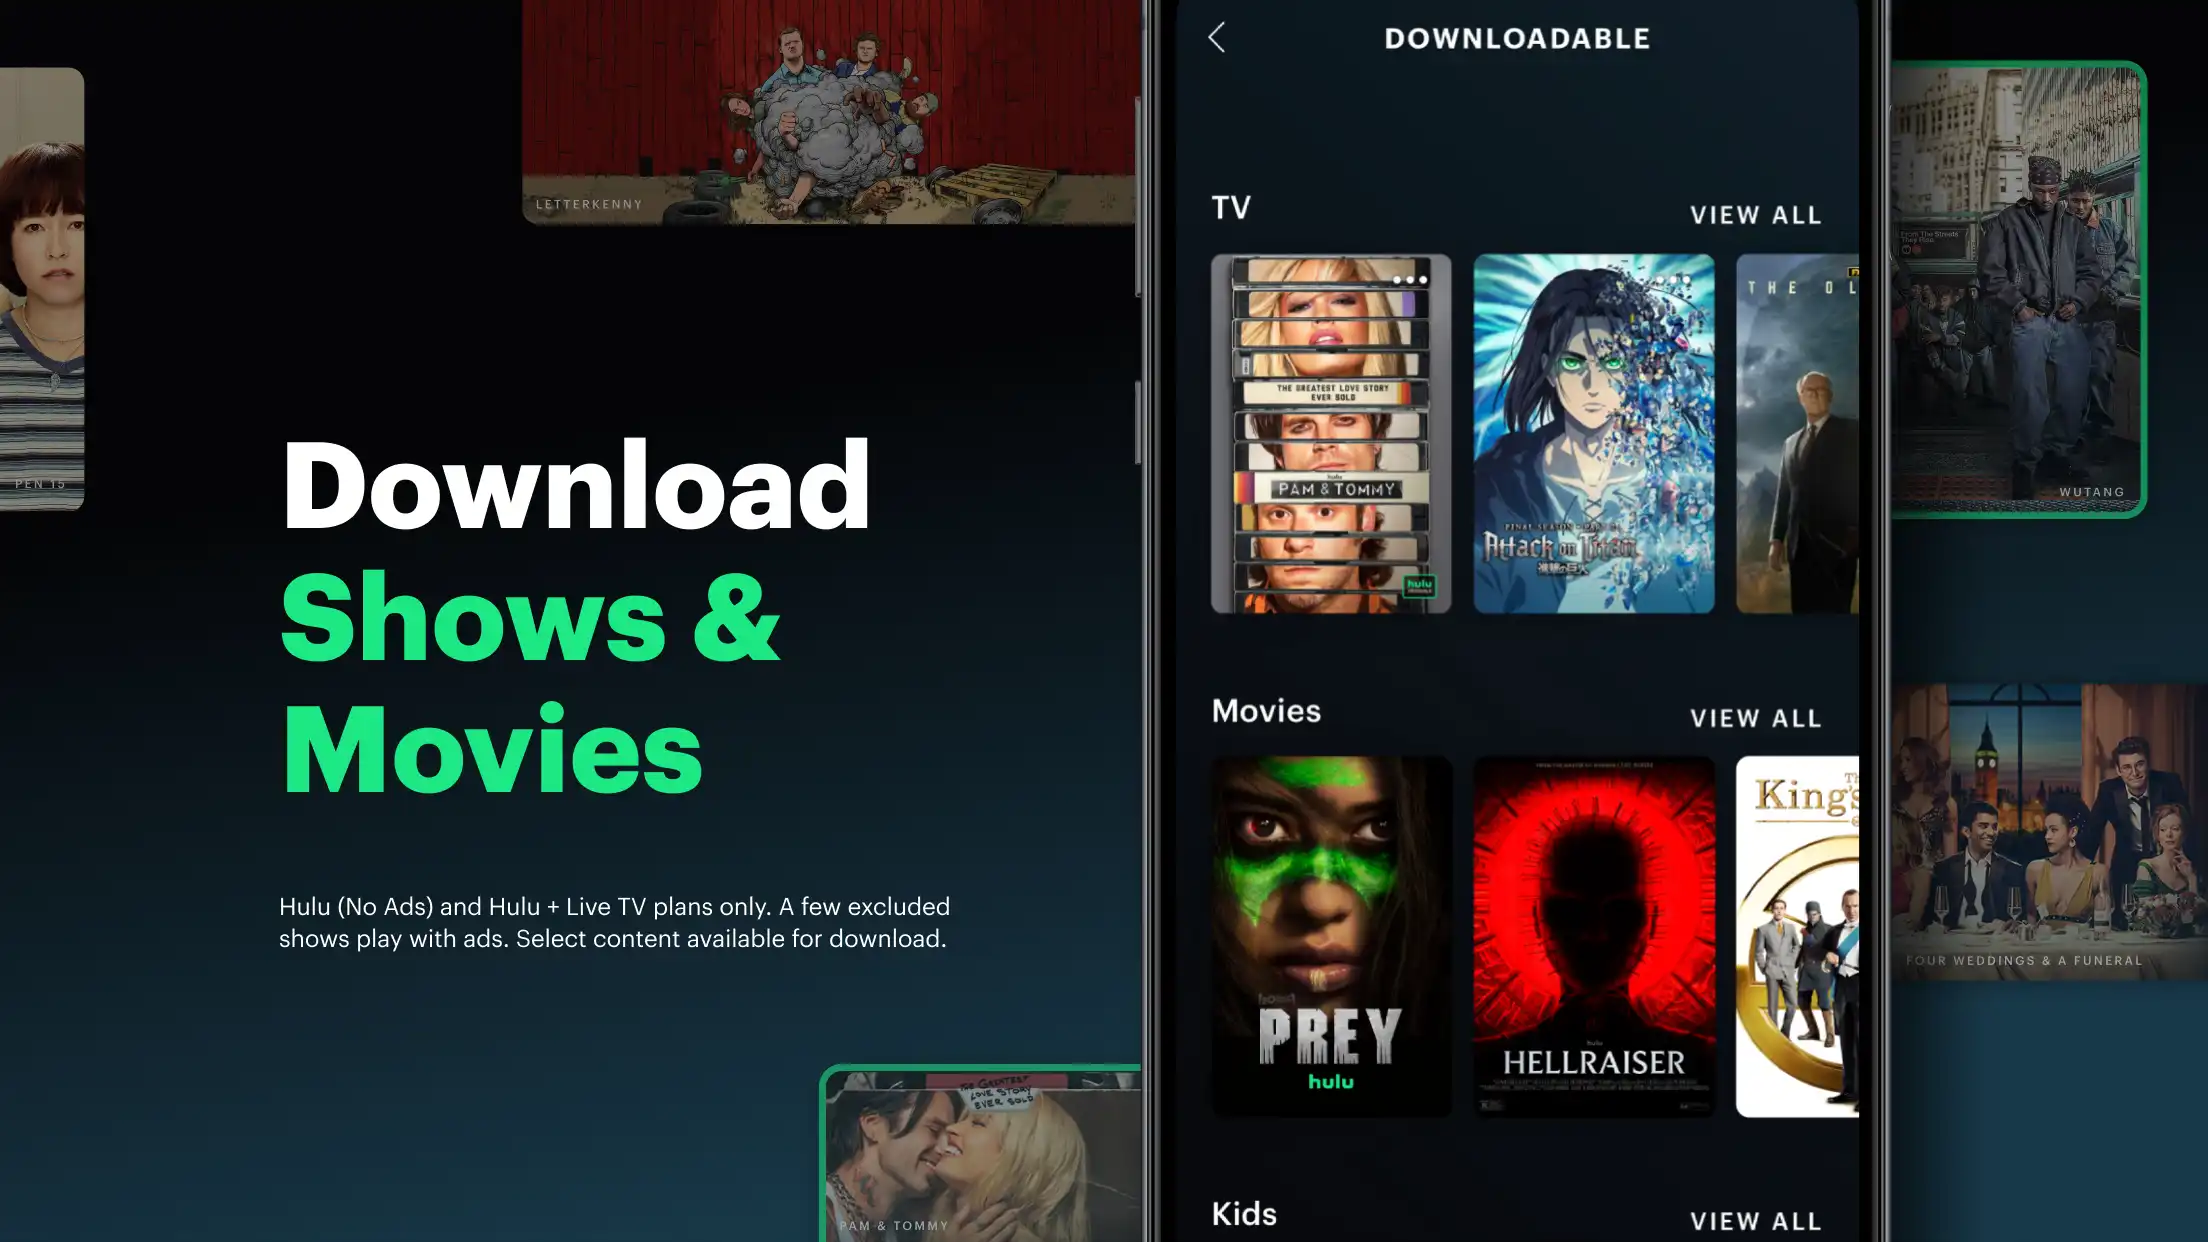 About the Hulu: Stream TV shows & movies